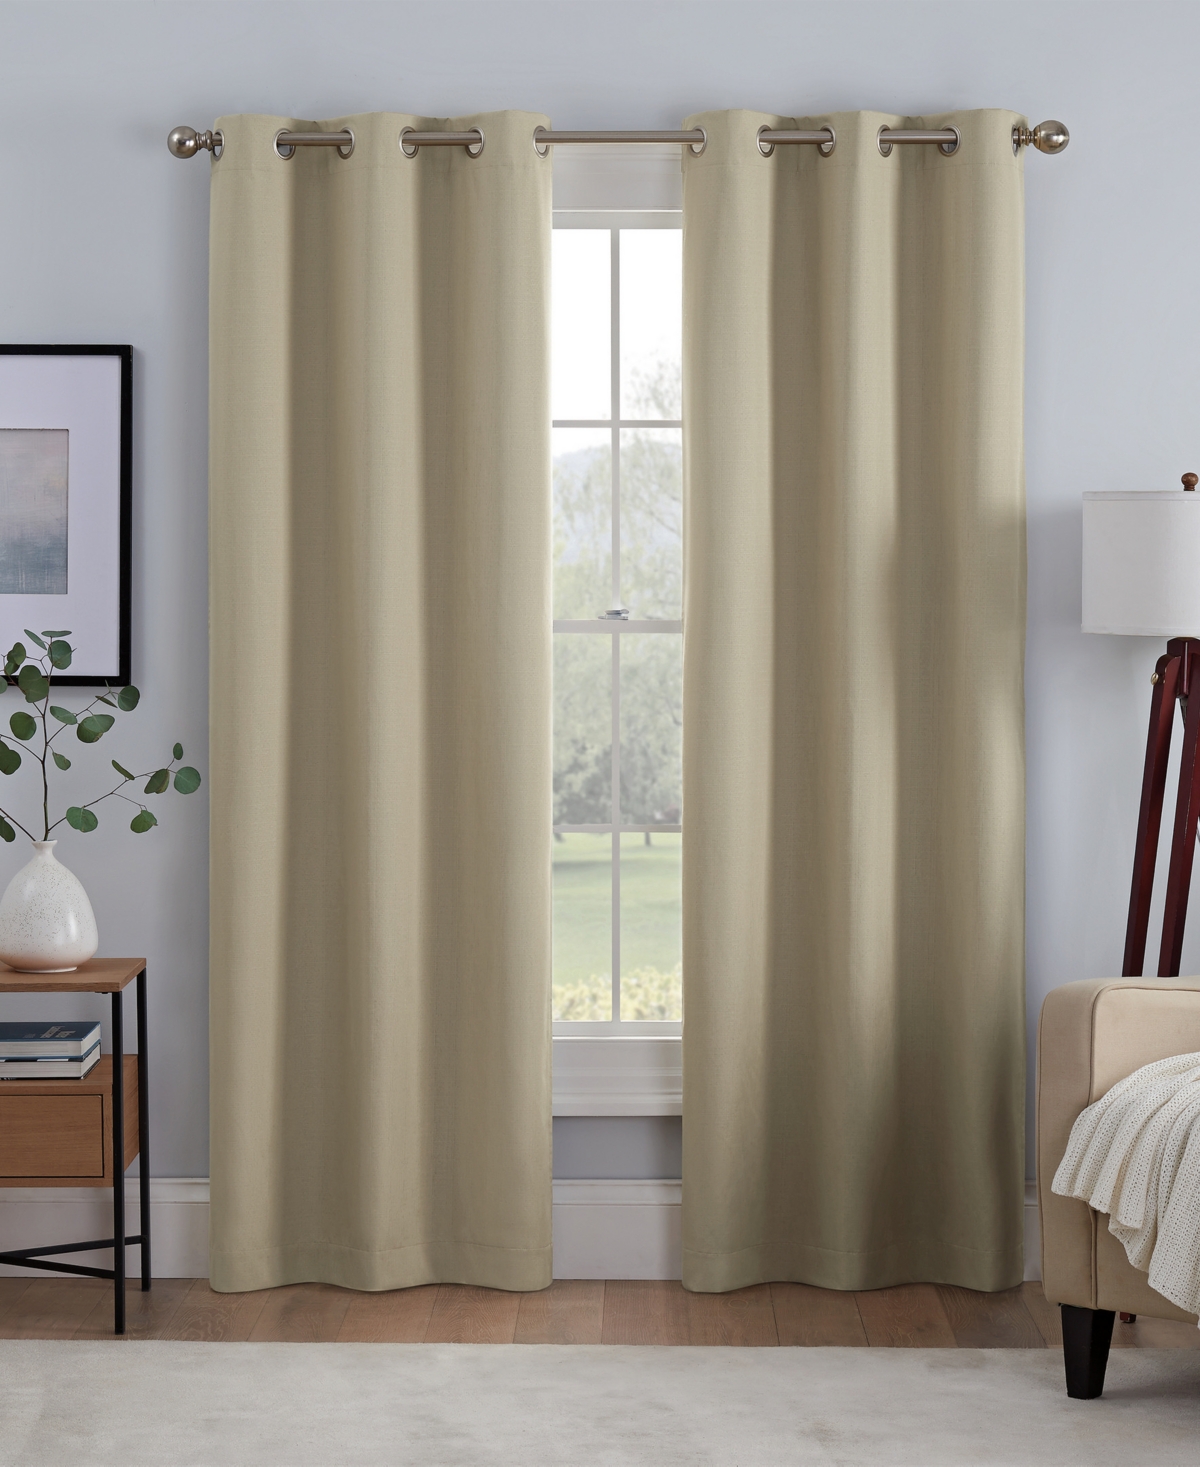 Eclipse Khloe 100% Absolute Zero Blackout Solid Textured Thermaback Curtain Panel, 84" X 40" In Tan